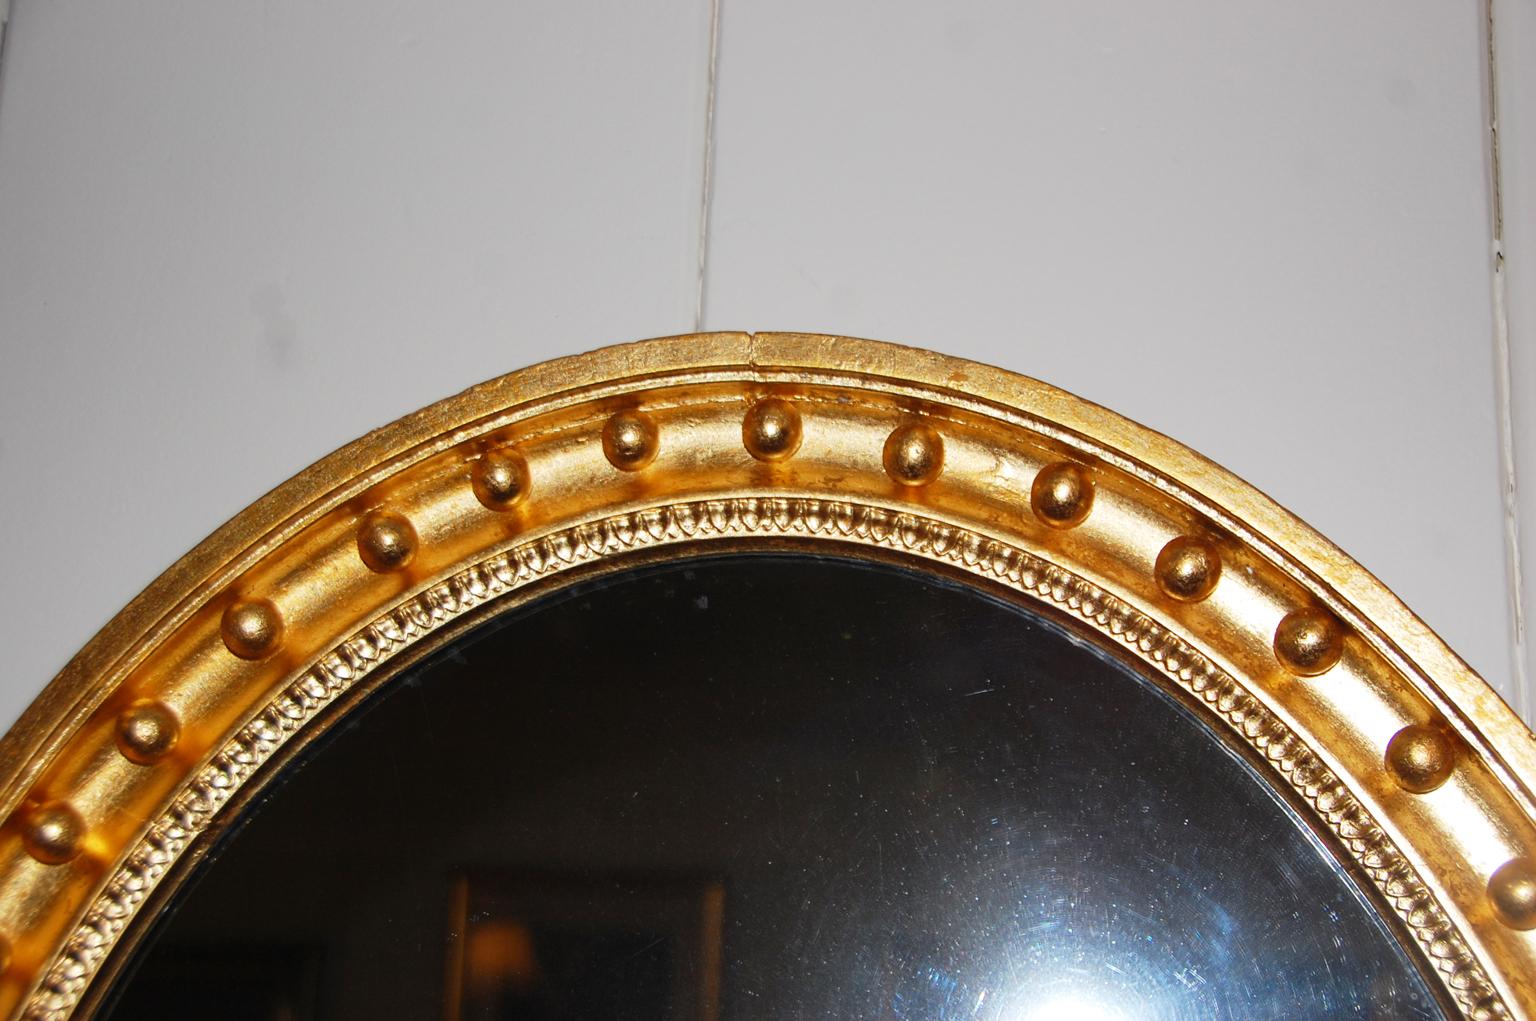 Early Victorian English Mid-19th Century Oval Gold Leaf Mirror with Balls